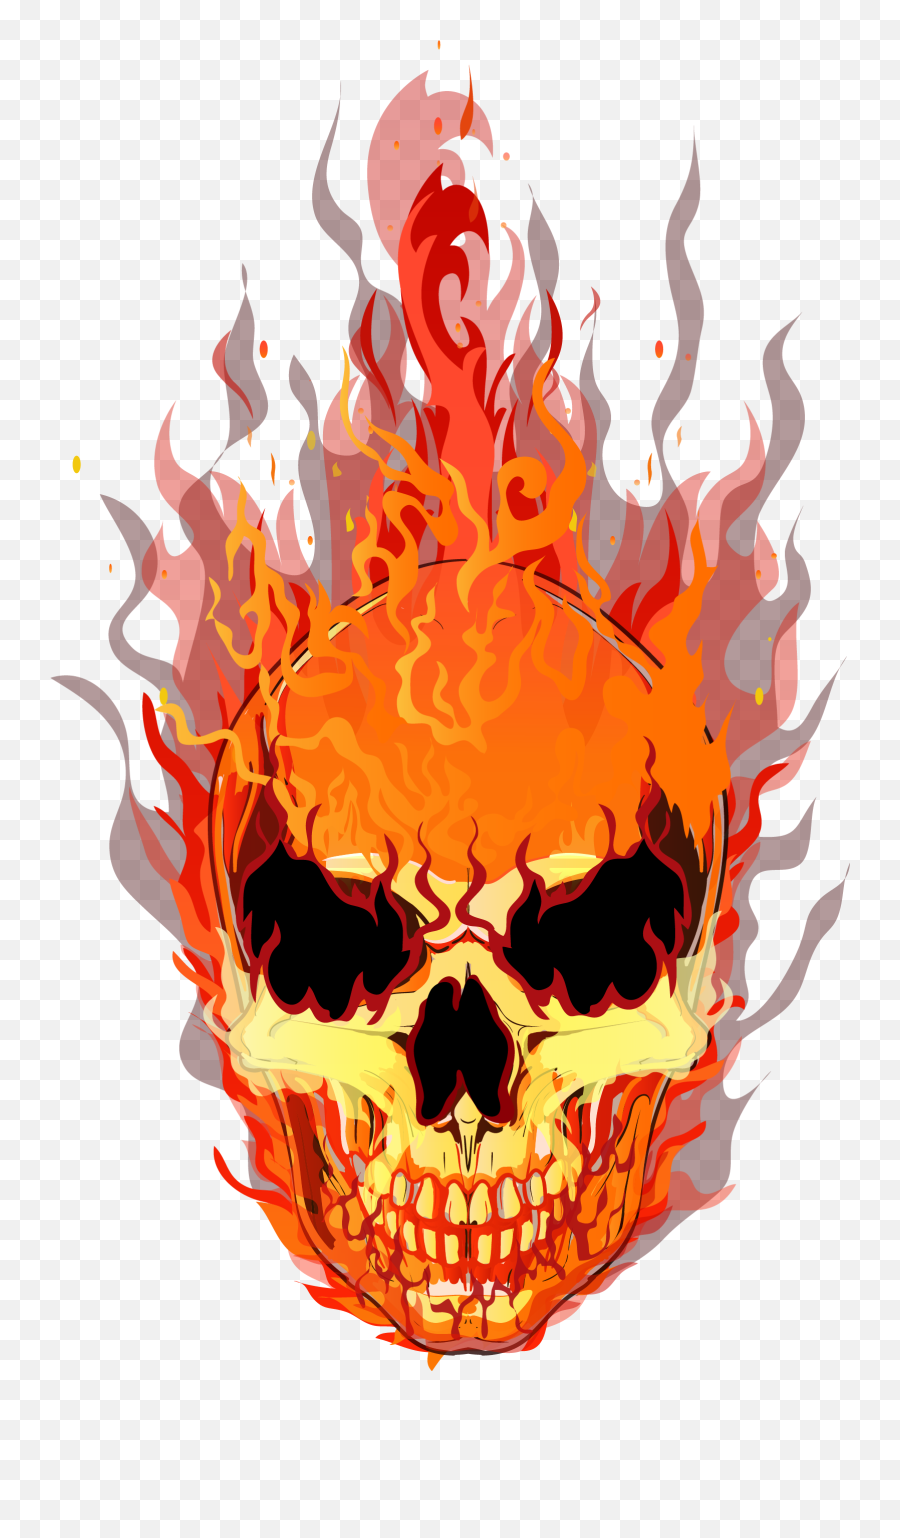 Download T - Shirt Fire Vector Flame Skull Free Clipart Hq Vector Images Of Free Fire Emoji,Flame Emoticon